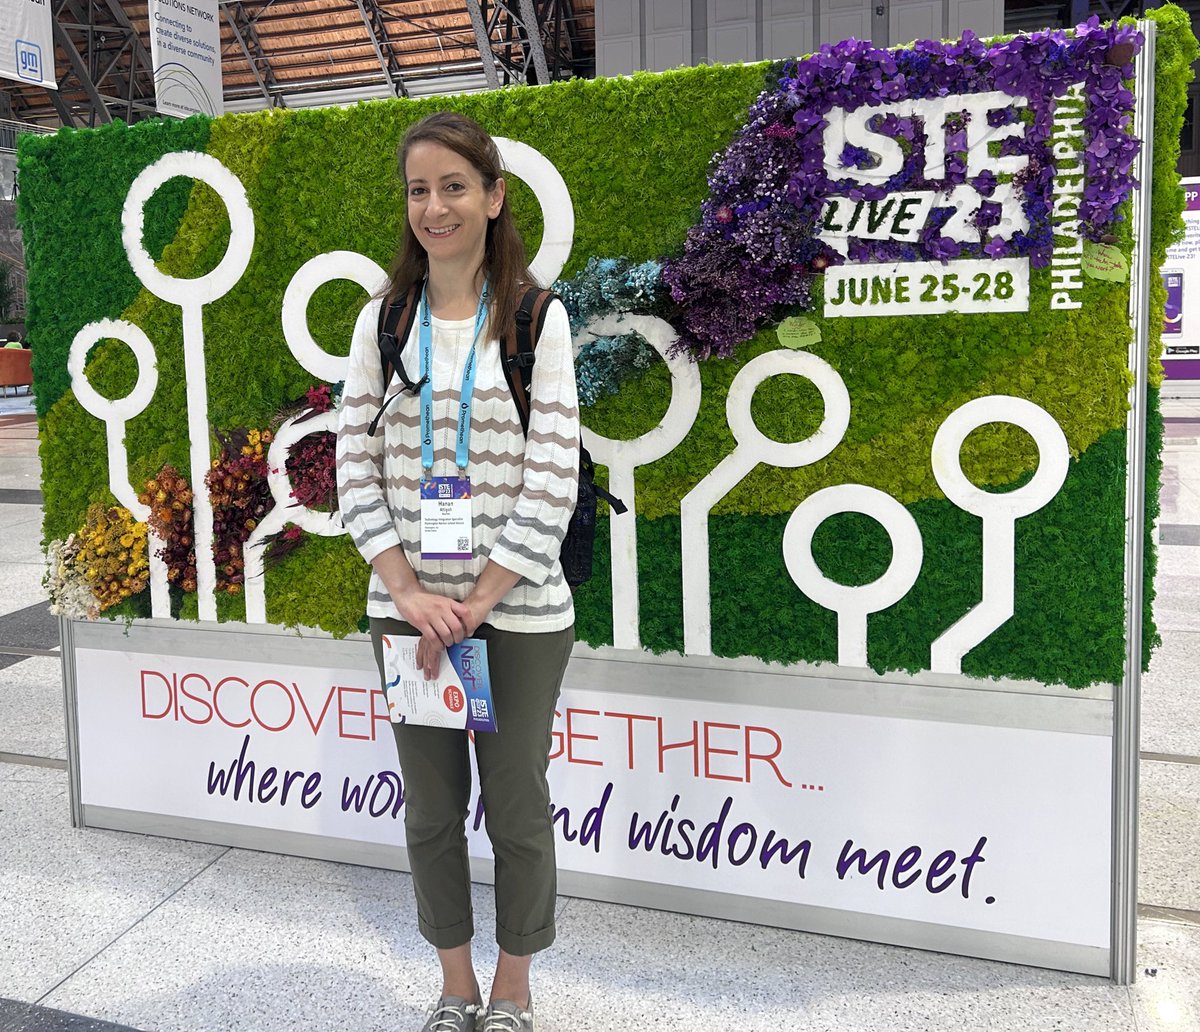 #ISTELive23 Wonder: What will ISTE23 bring to my life?